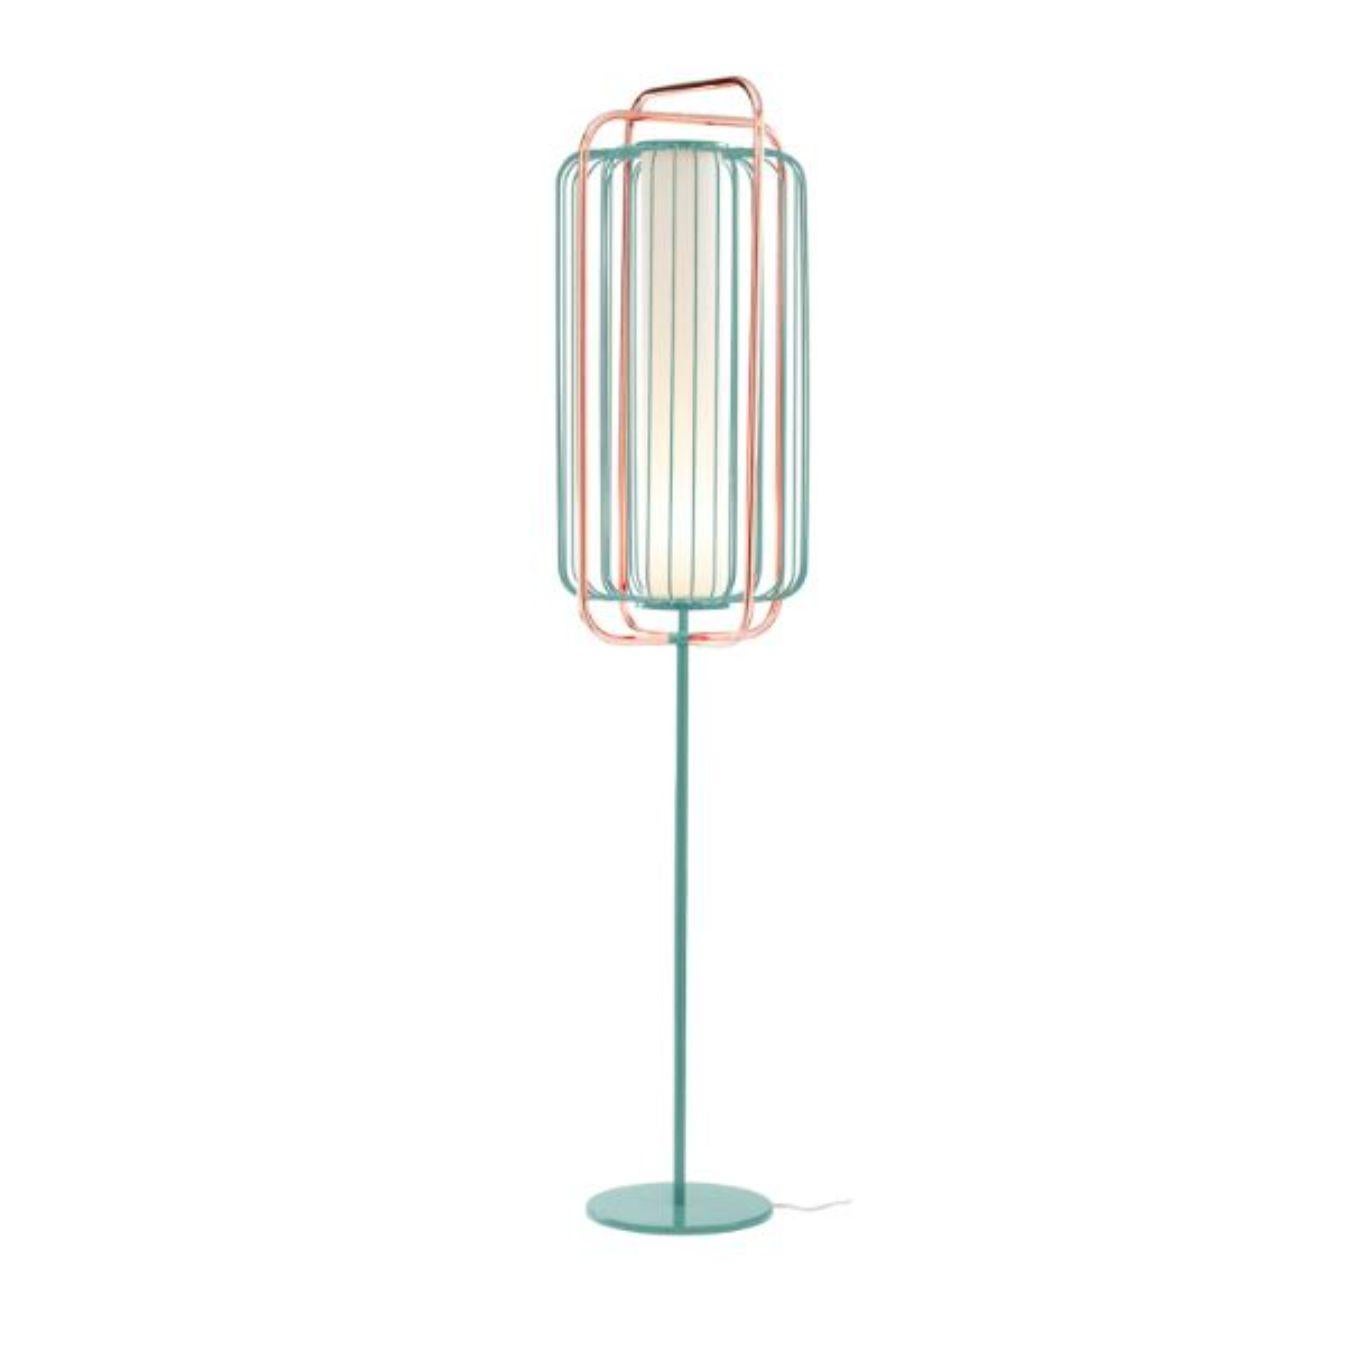 Copper and mint Jules floor lamp by Dooq
Dimensions: W 38 x D 38 x H 177 cm
Materials: lacquered metal, polished or brushed metal, copper.
abat-jour: cotton
Also available in different colours and materials.

Information:
230V/50Hz
E27/1x20W